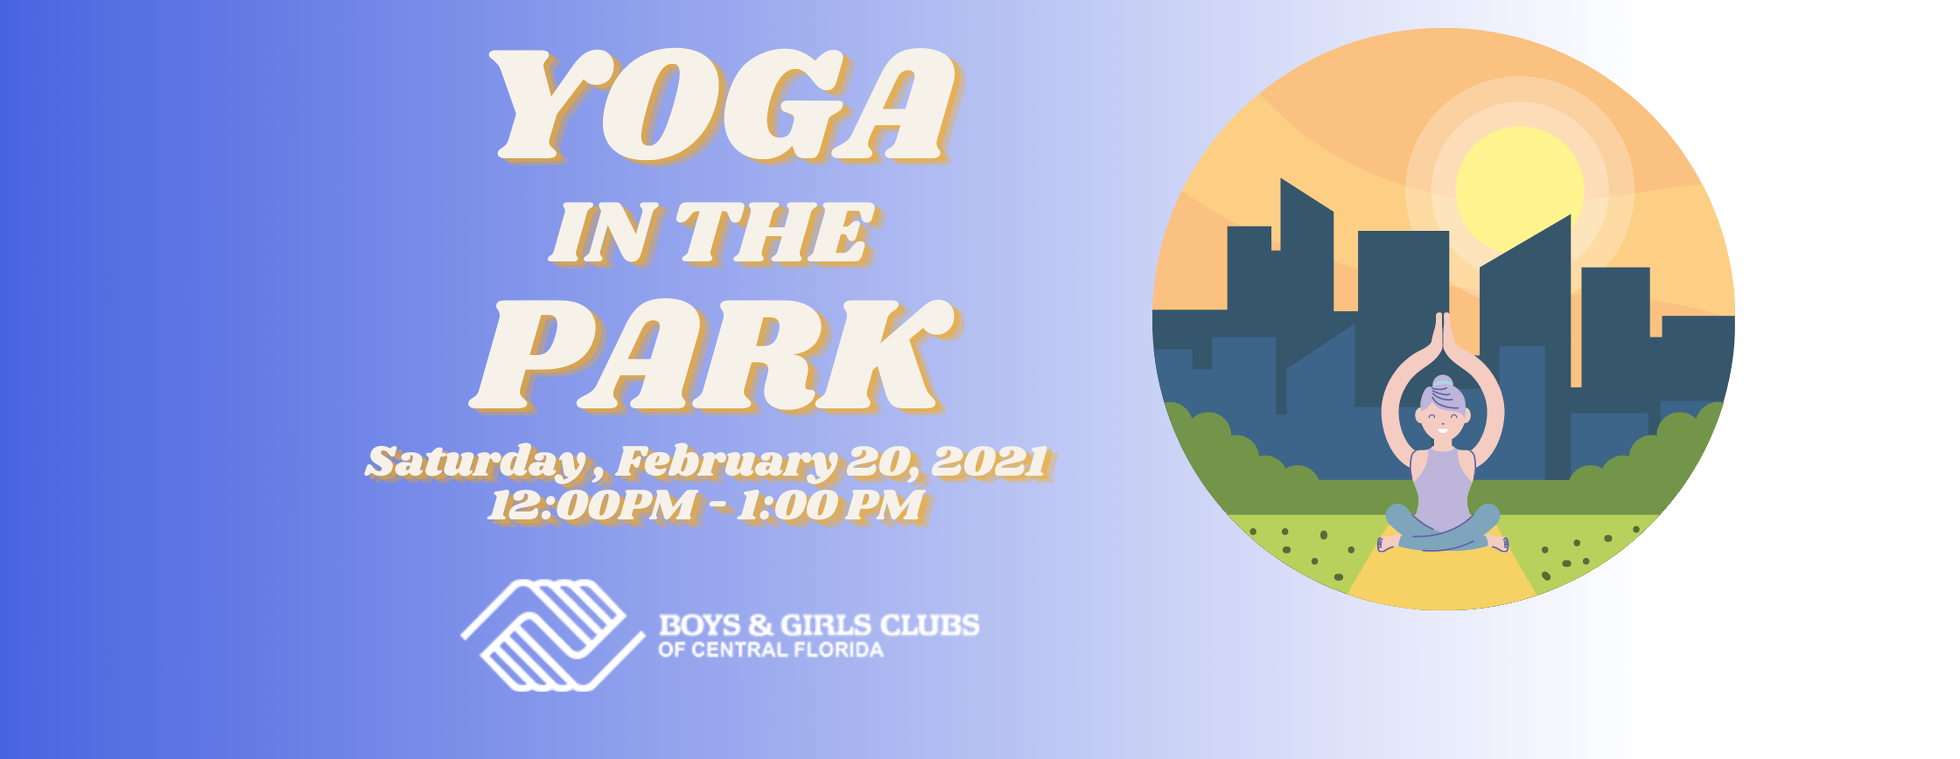 Yoga in the Park 2021